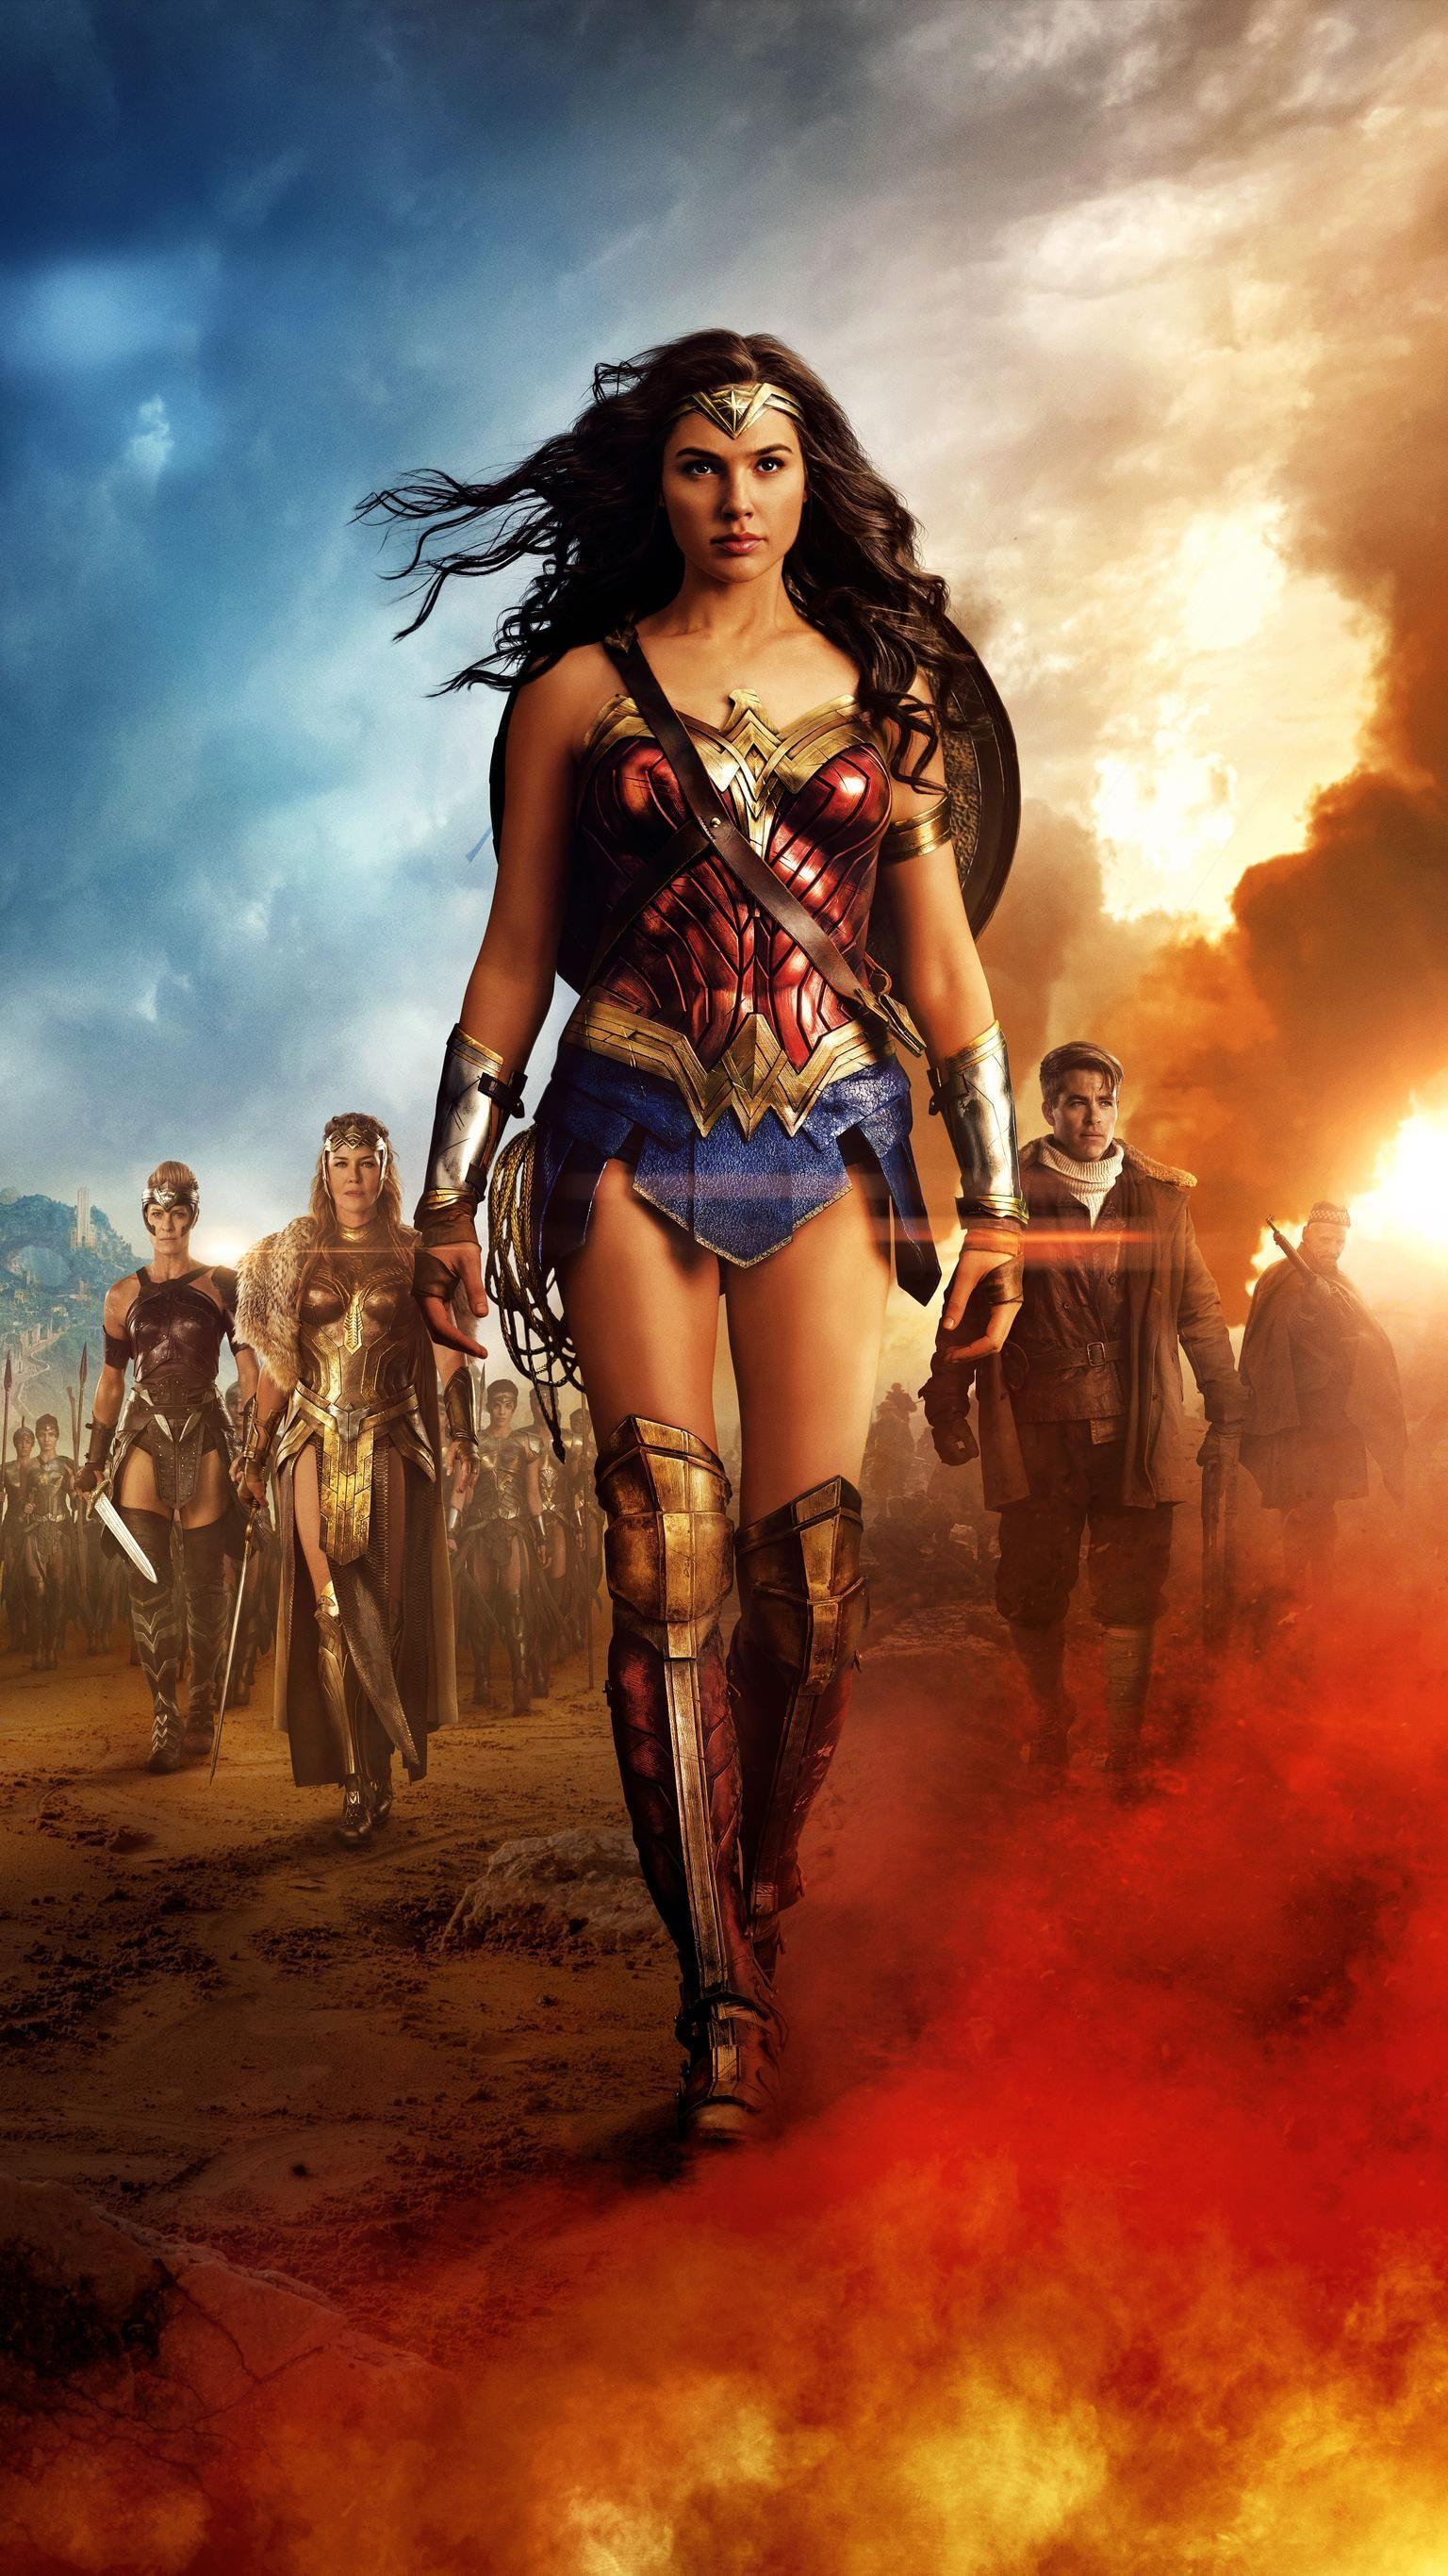 Wonder Woman Android Wallpaper Free Wonder Woman Android Background